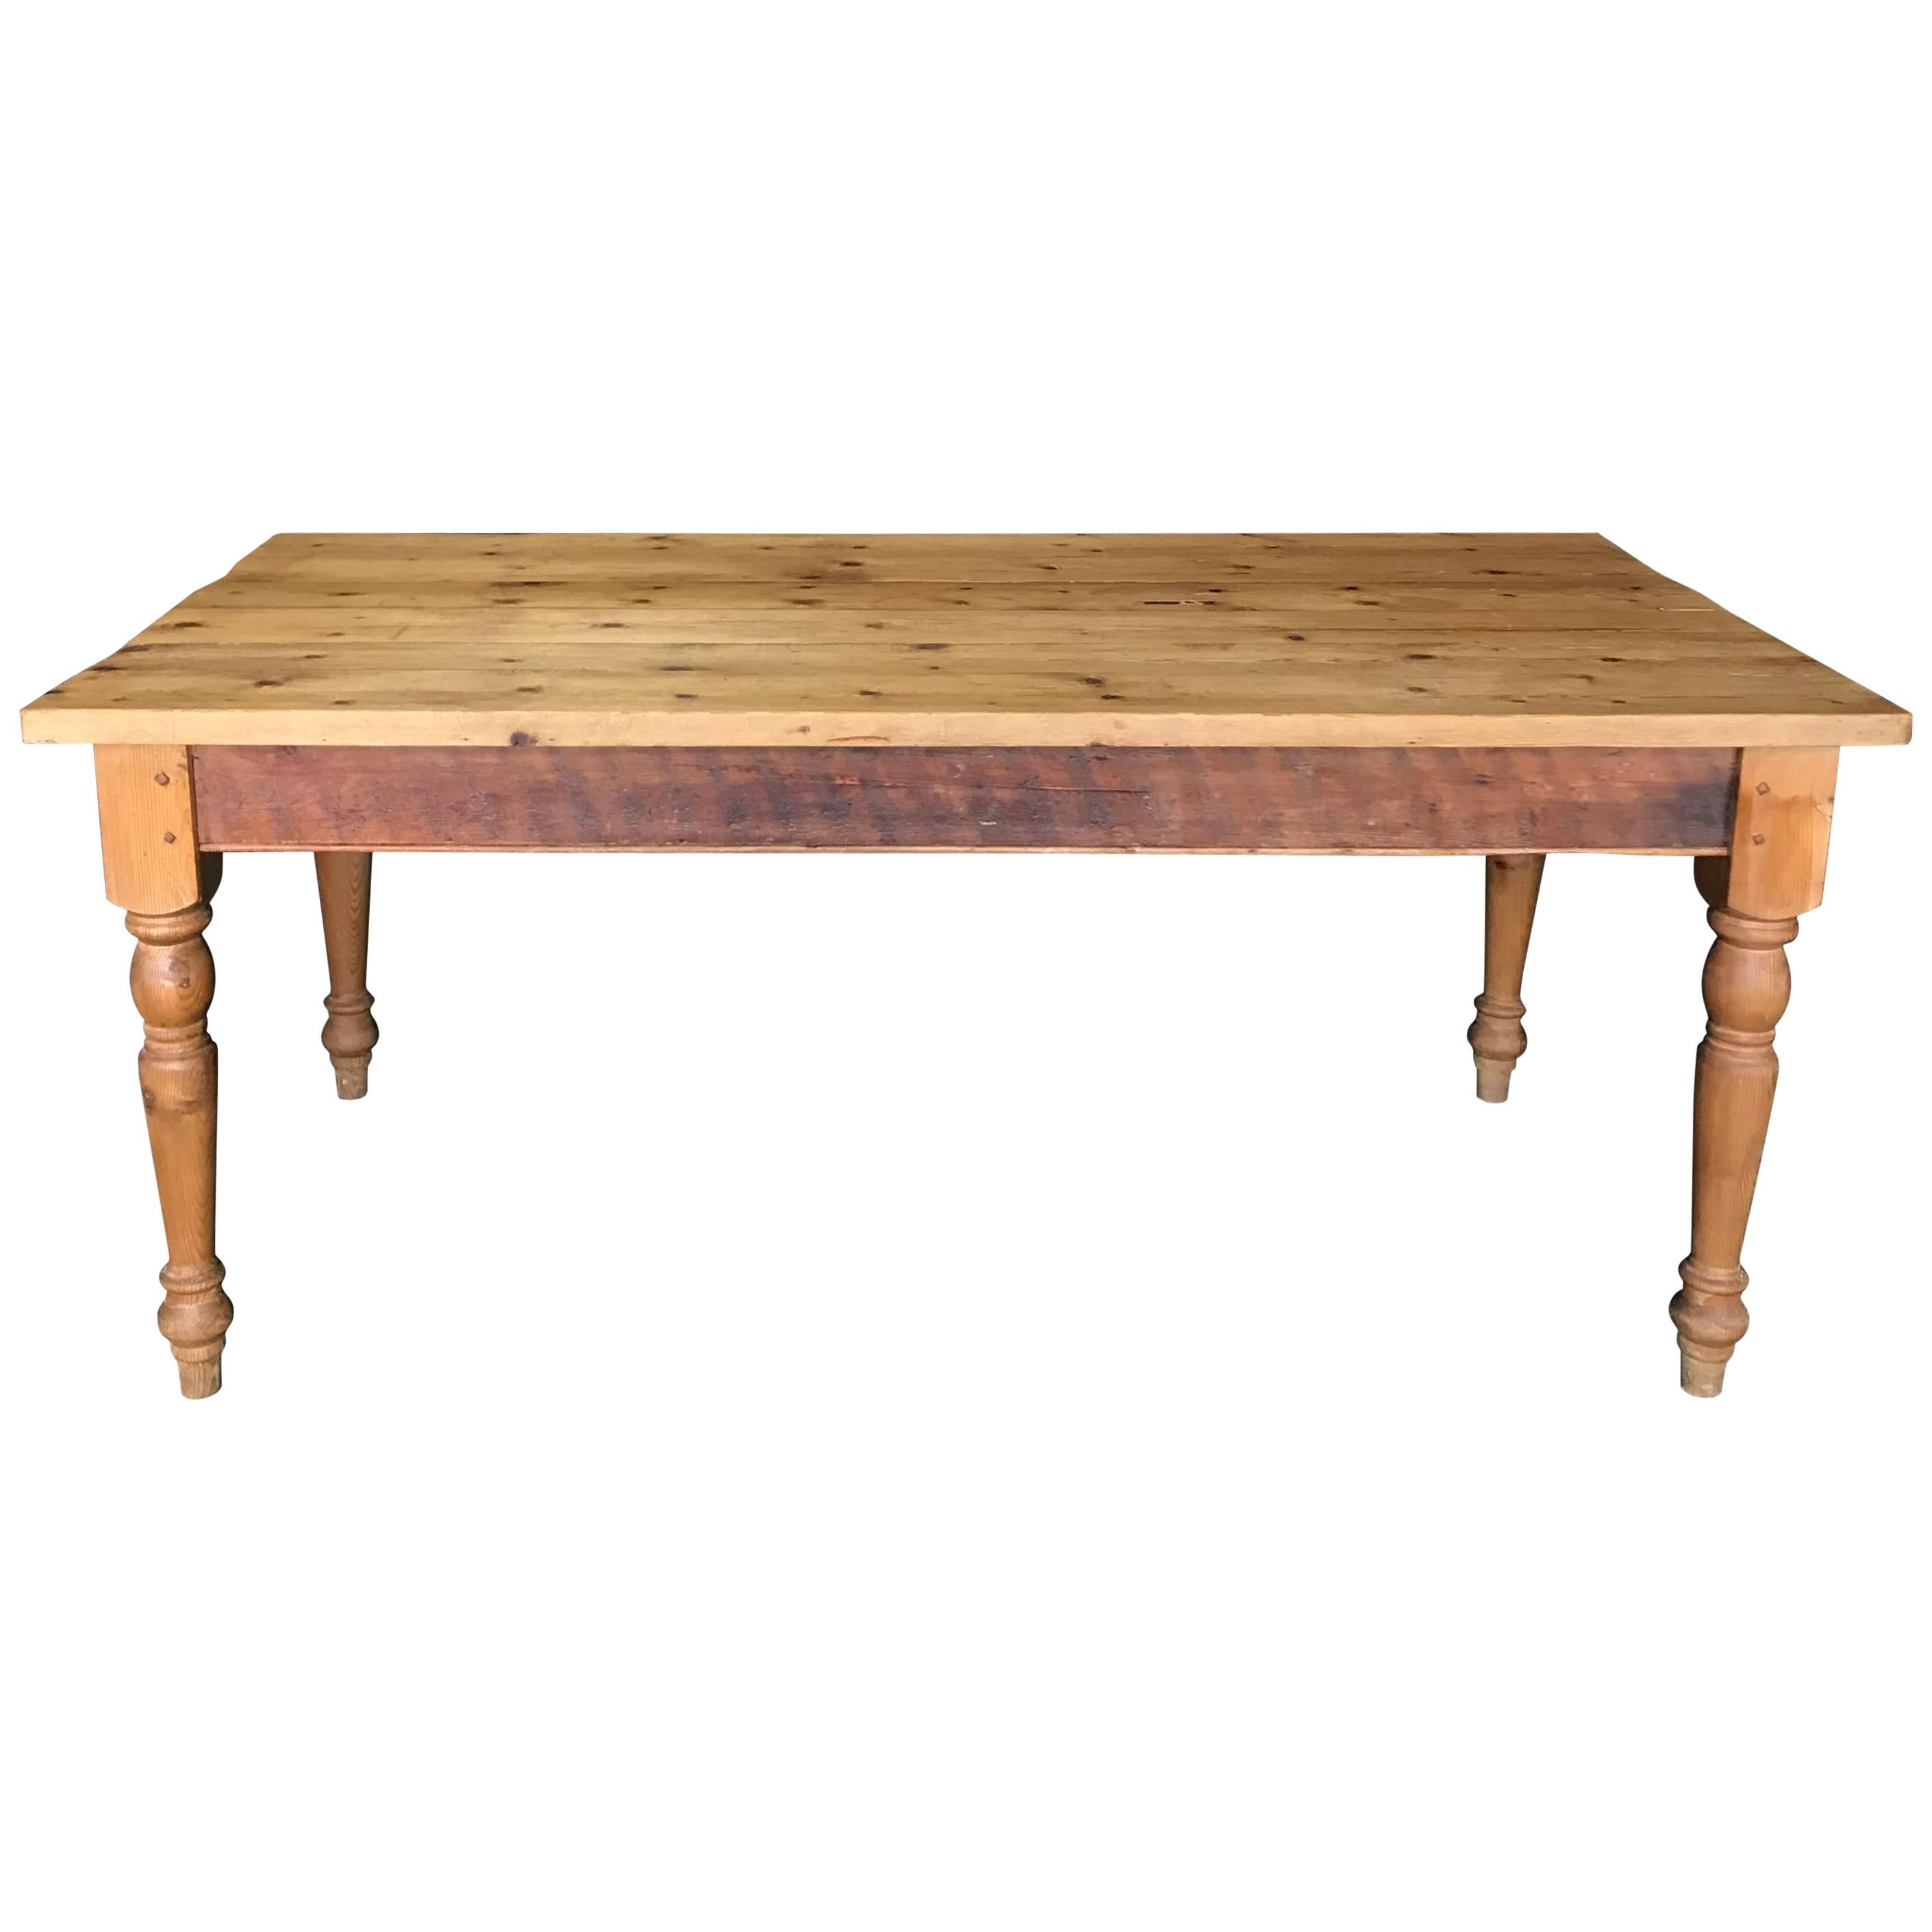 19th Century English Large Scrubbed Pine Farmhouse Dining Table